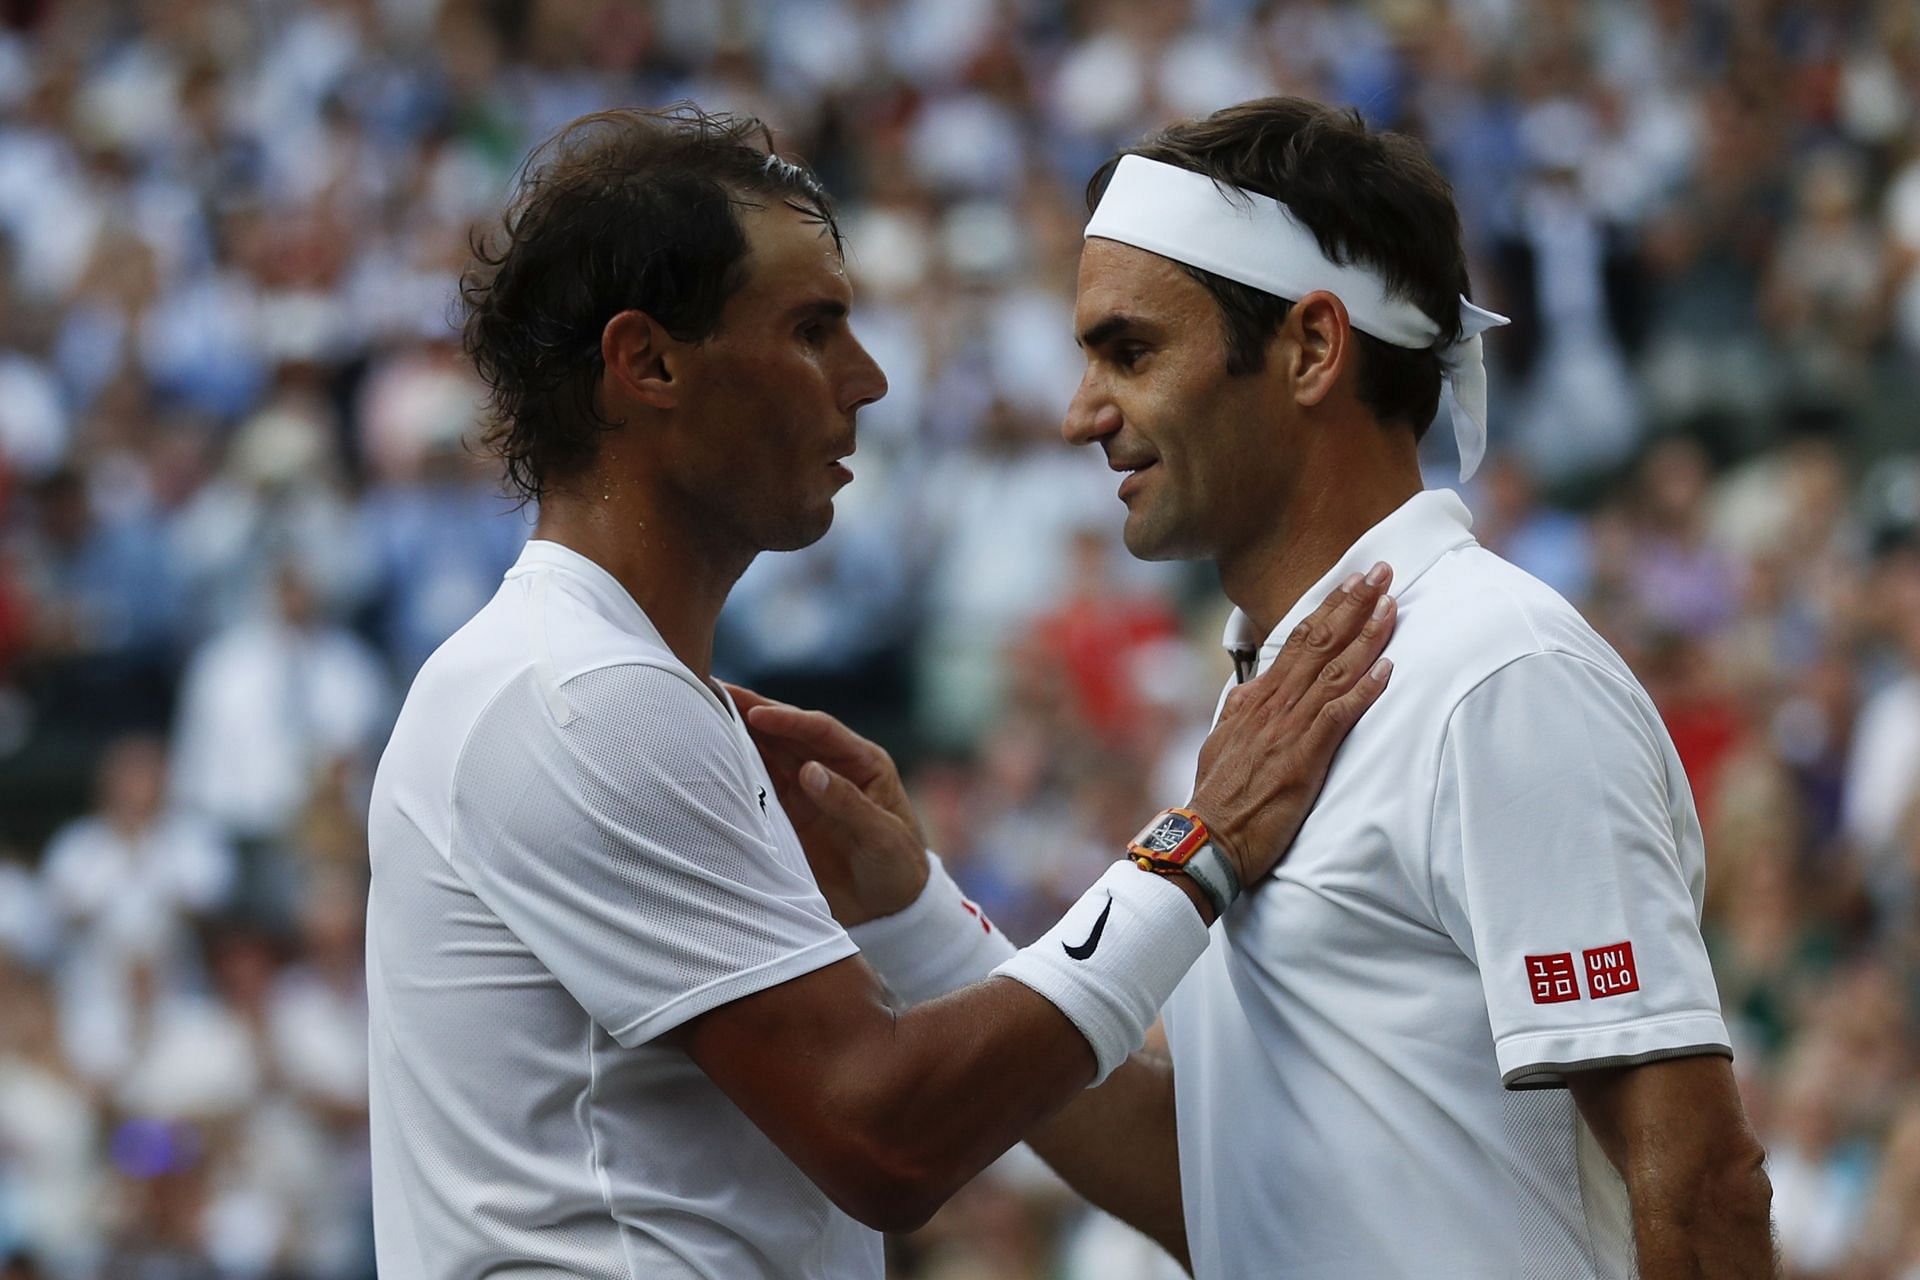 Roger Federer and Rafael Nadal at the Wimbledon Championships